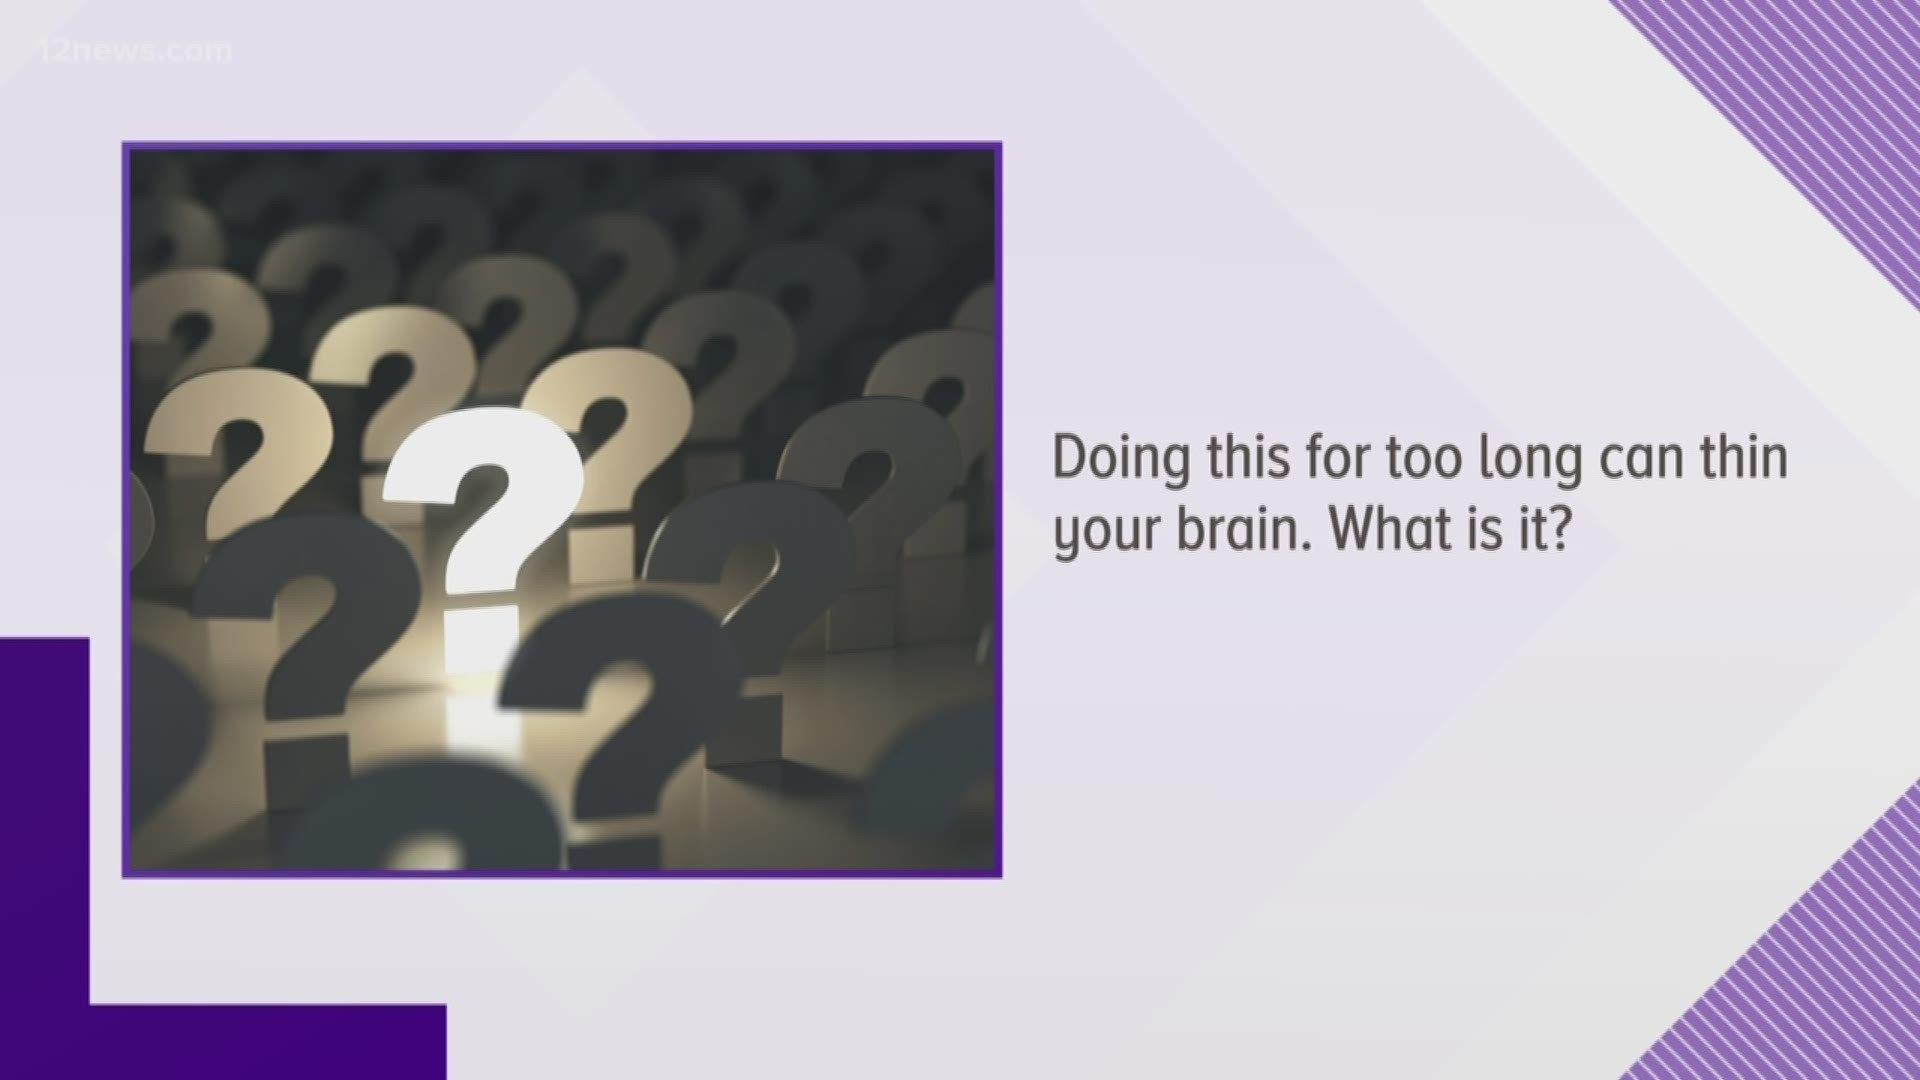 Doing this for too long can thin your brain. What is it?